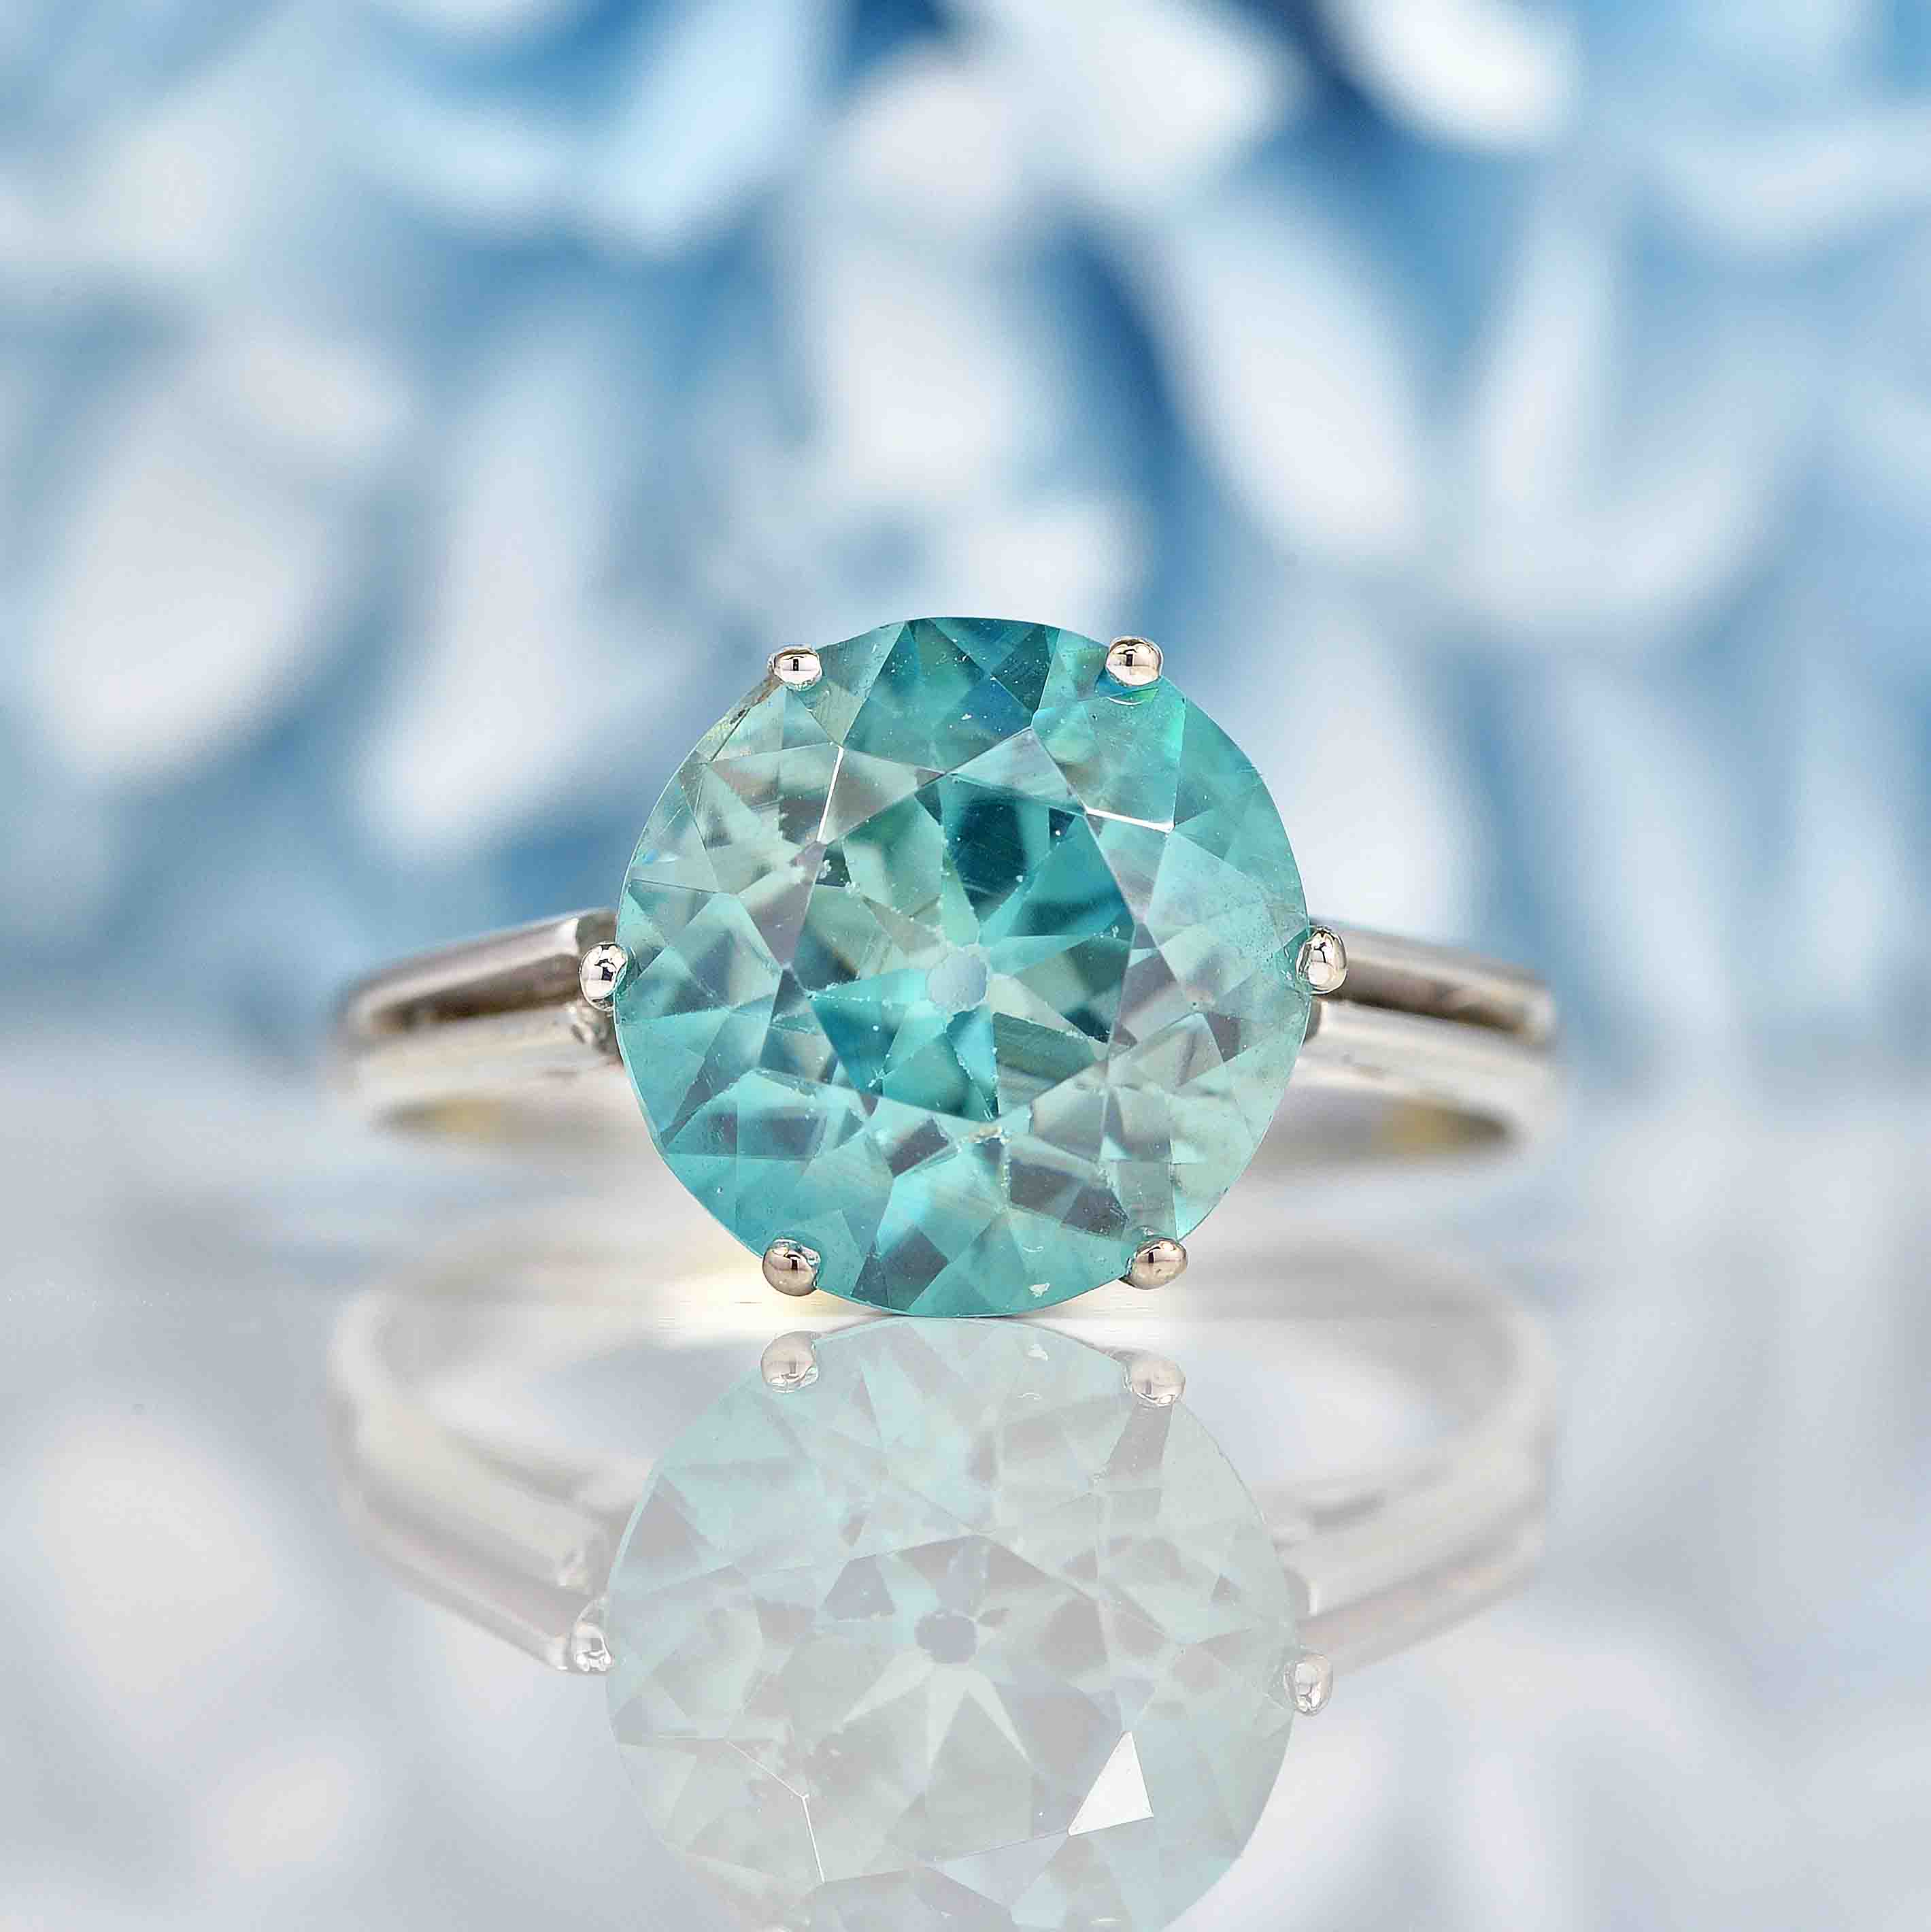 Ellibelle Jewellery Blue Zircon 18ct White Gold Solitaire Ring (5.52ct)